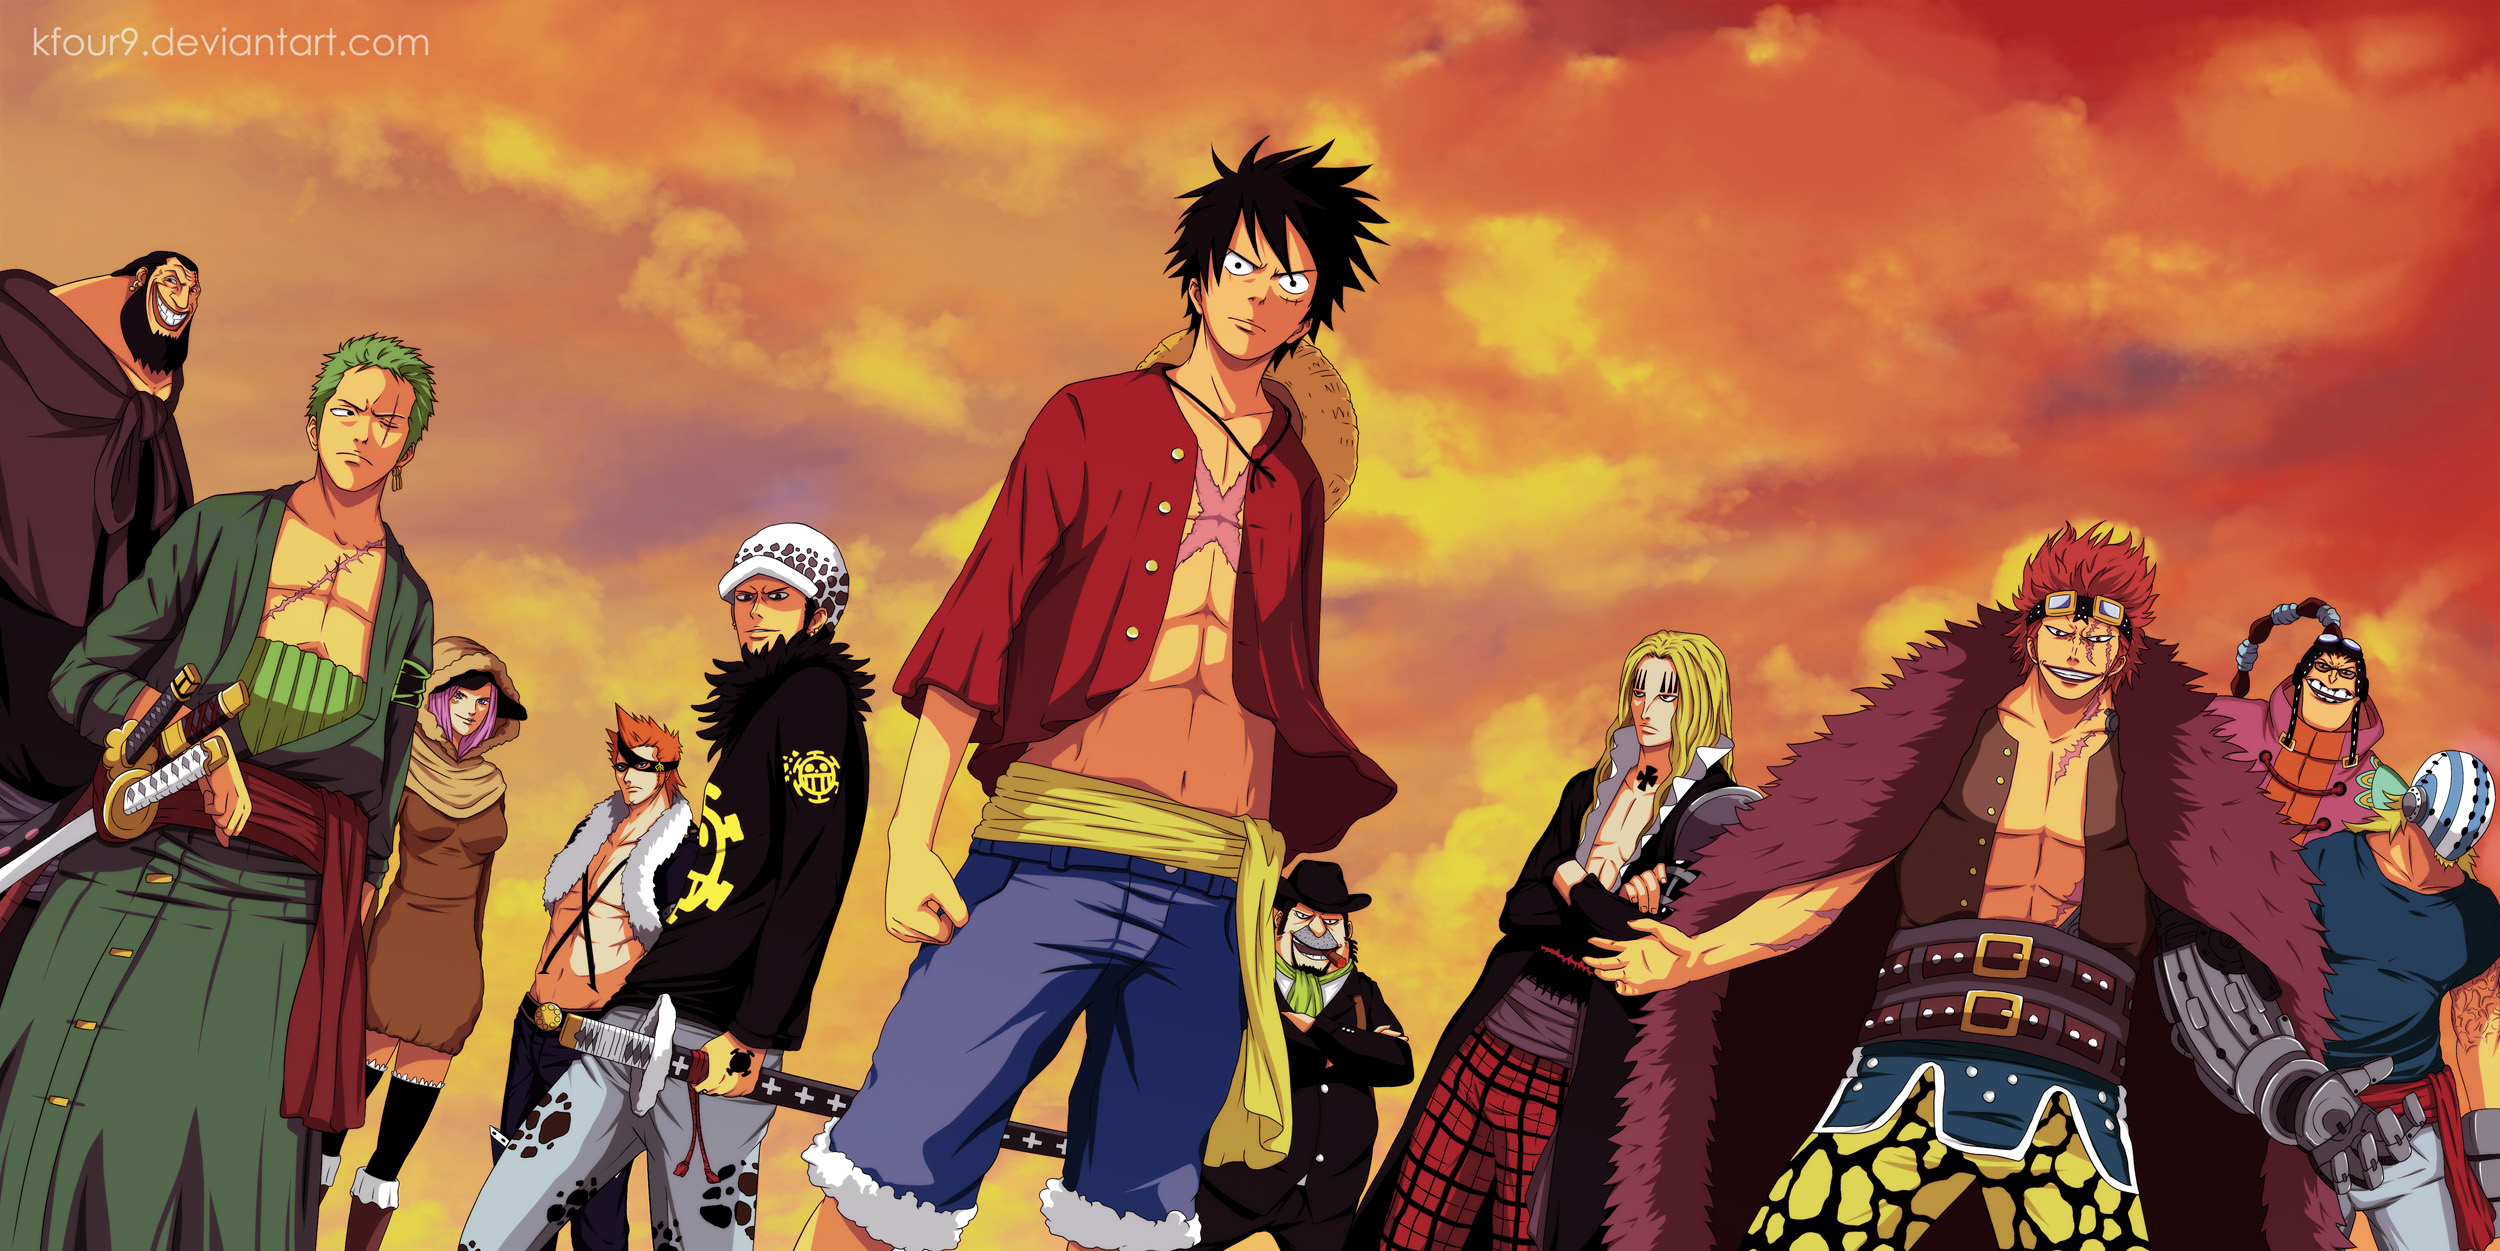 Anime One Piece HD Wallpaper by KFour9